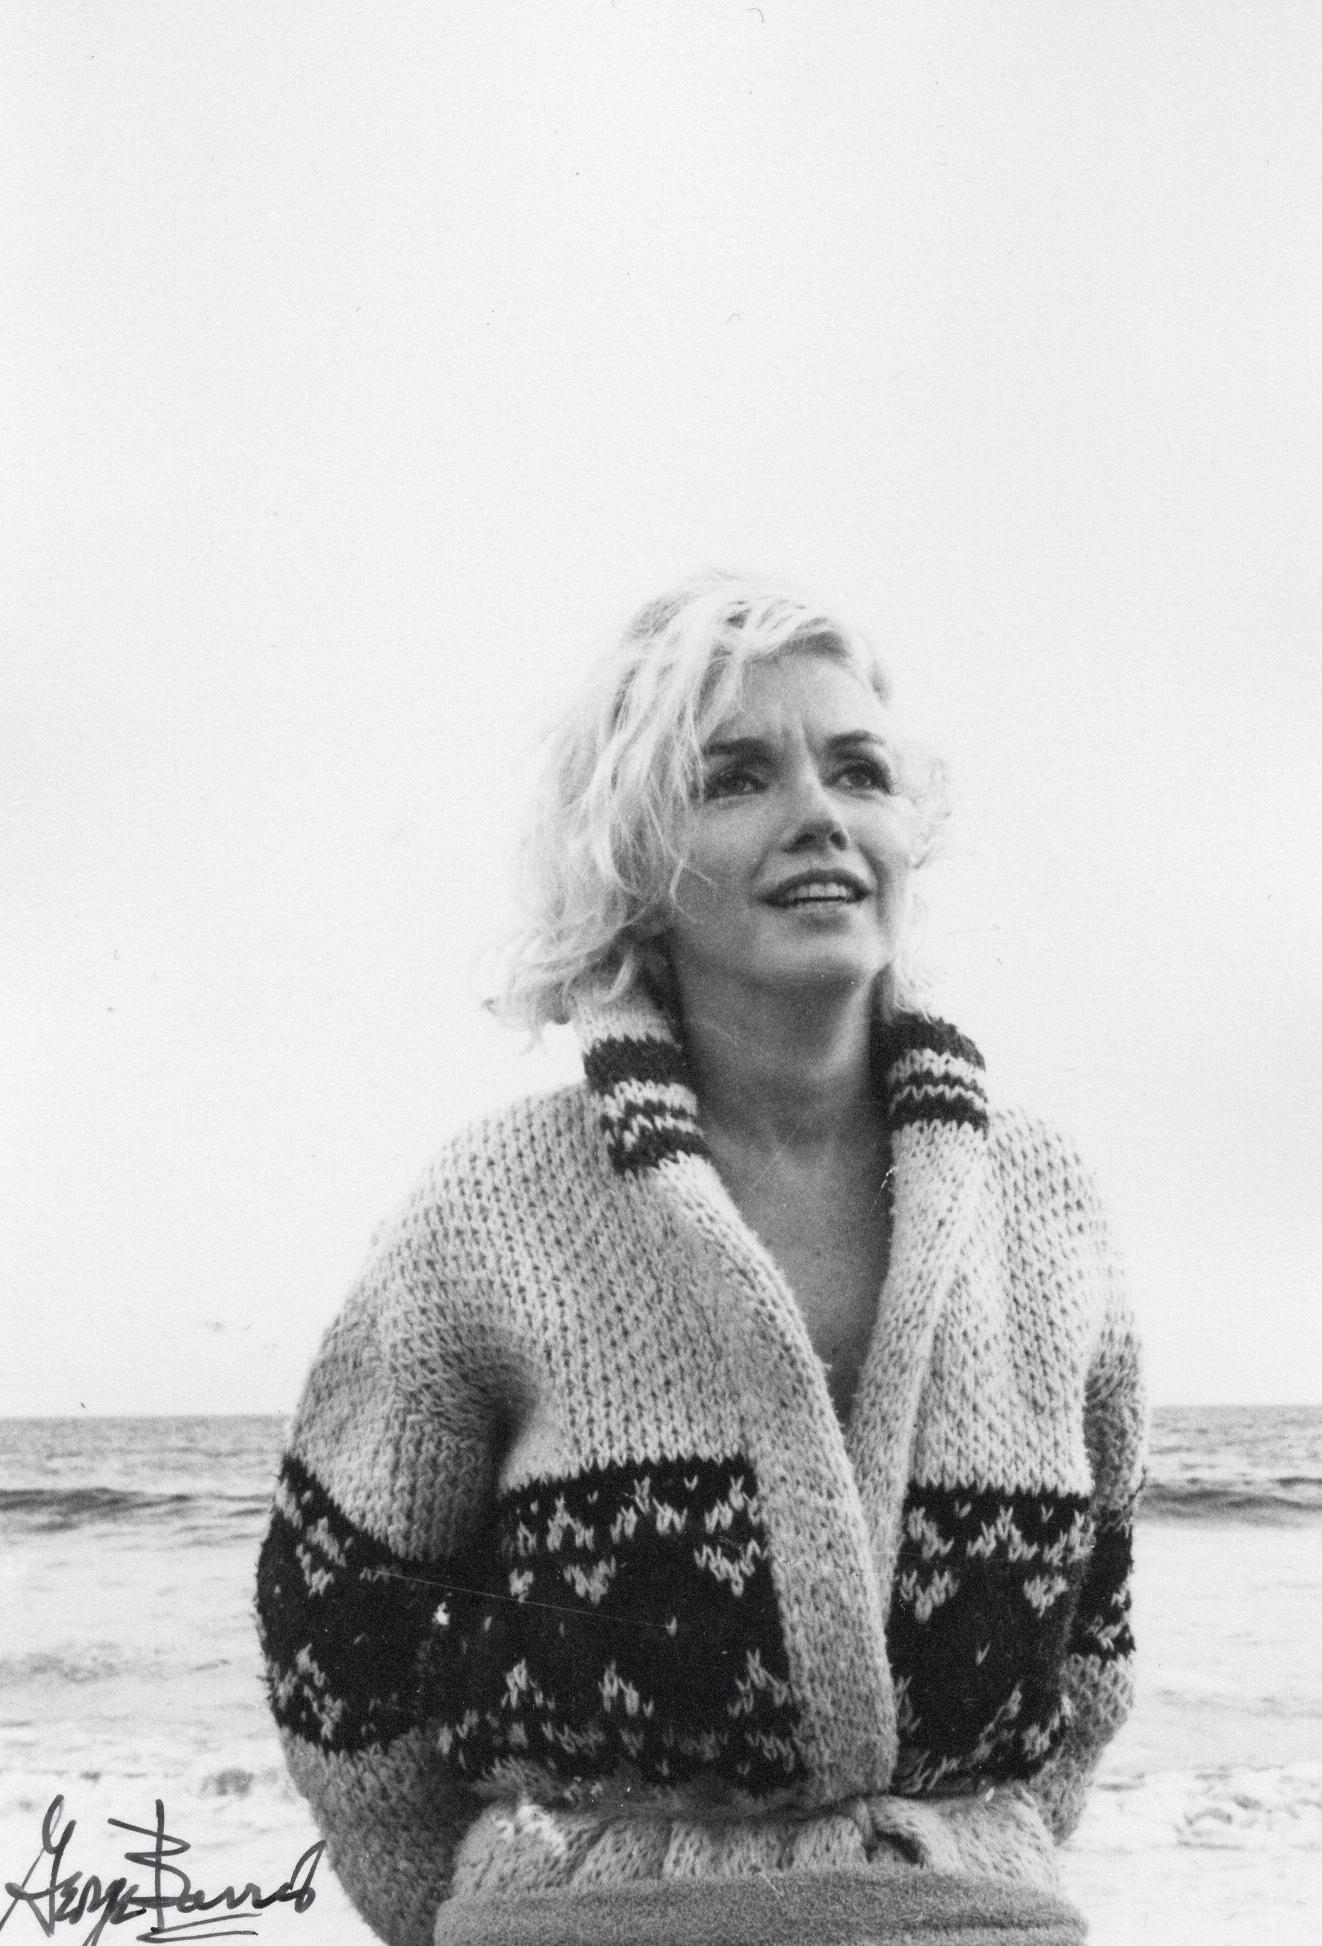 George Barris Black and White Photograph - Marilyn Monroe in Knit Sweater on the Beach Vintage Original Photograph